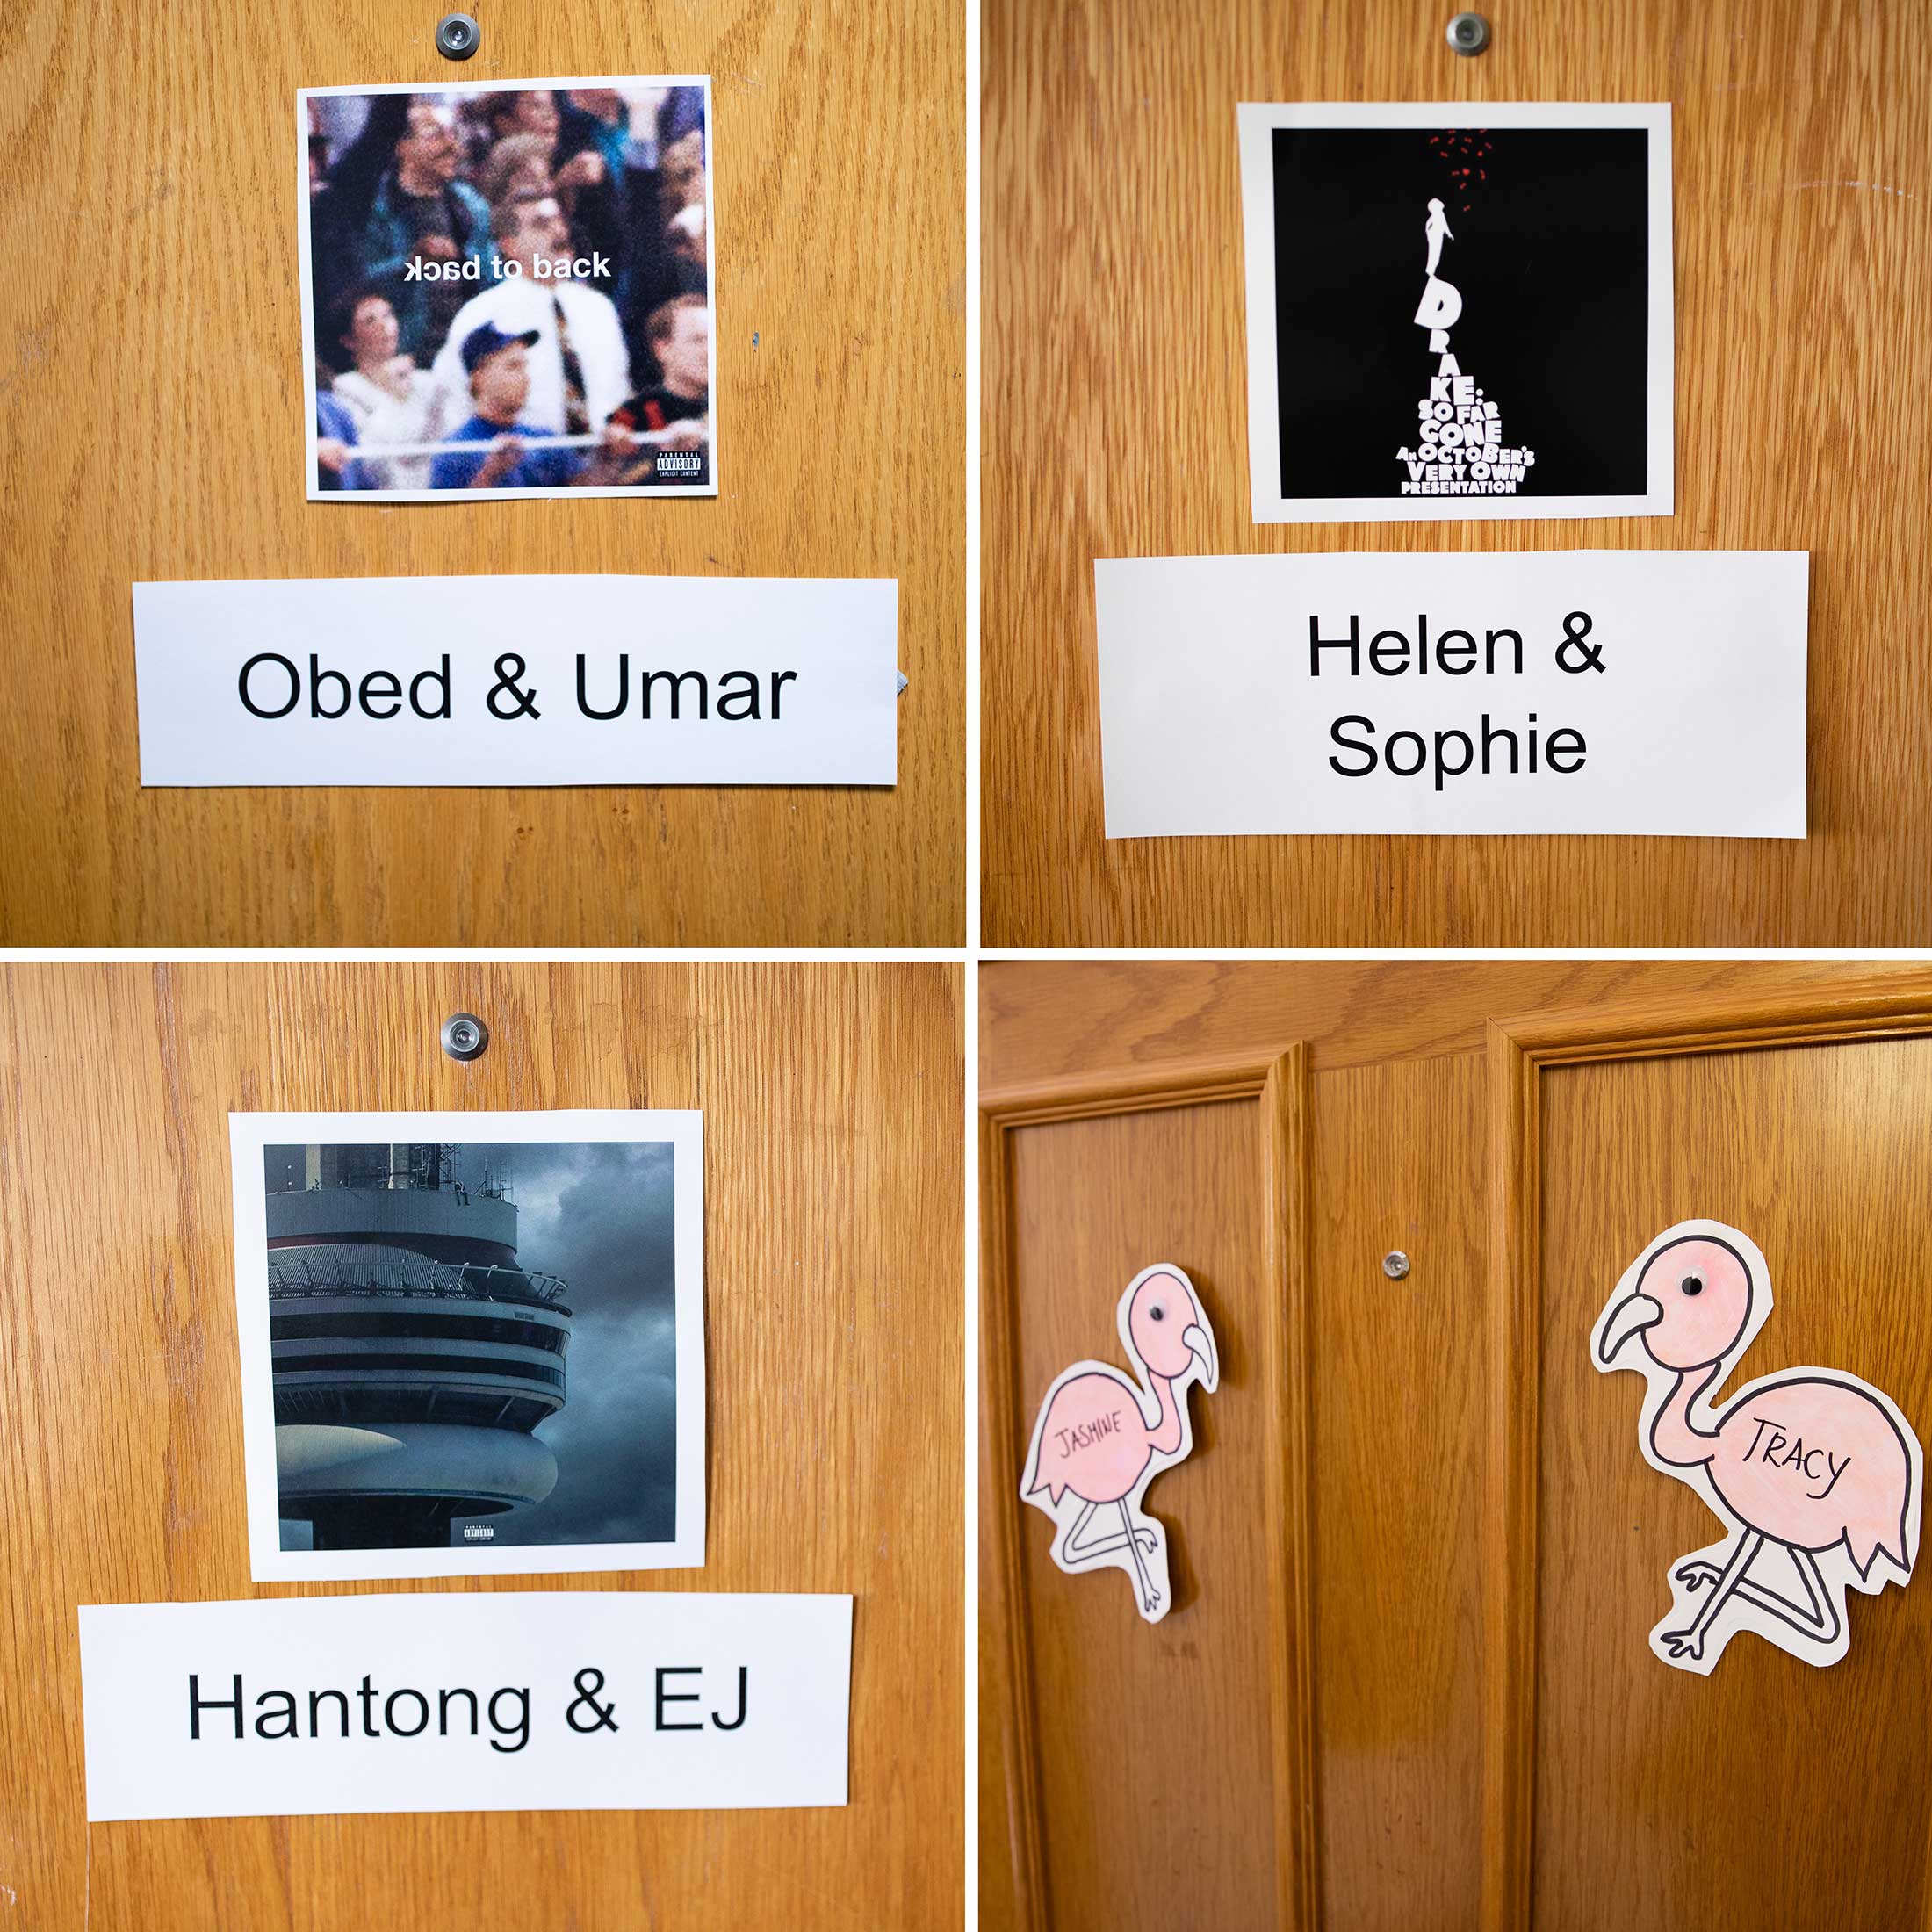 Examples of unique names tags found on residence hall rooms